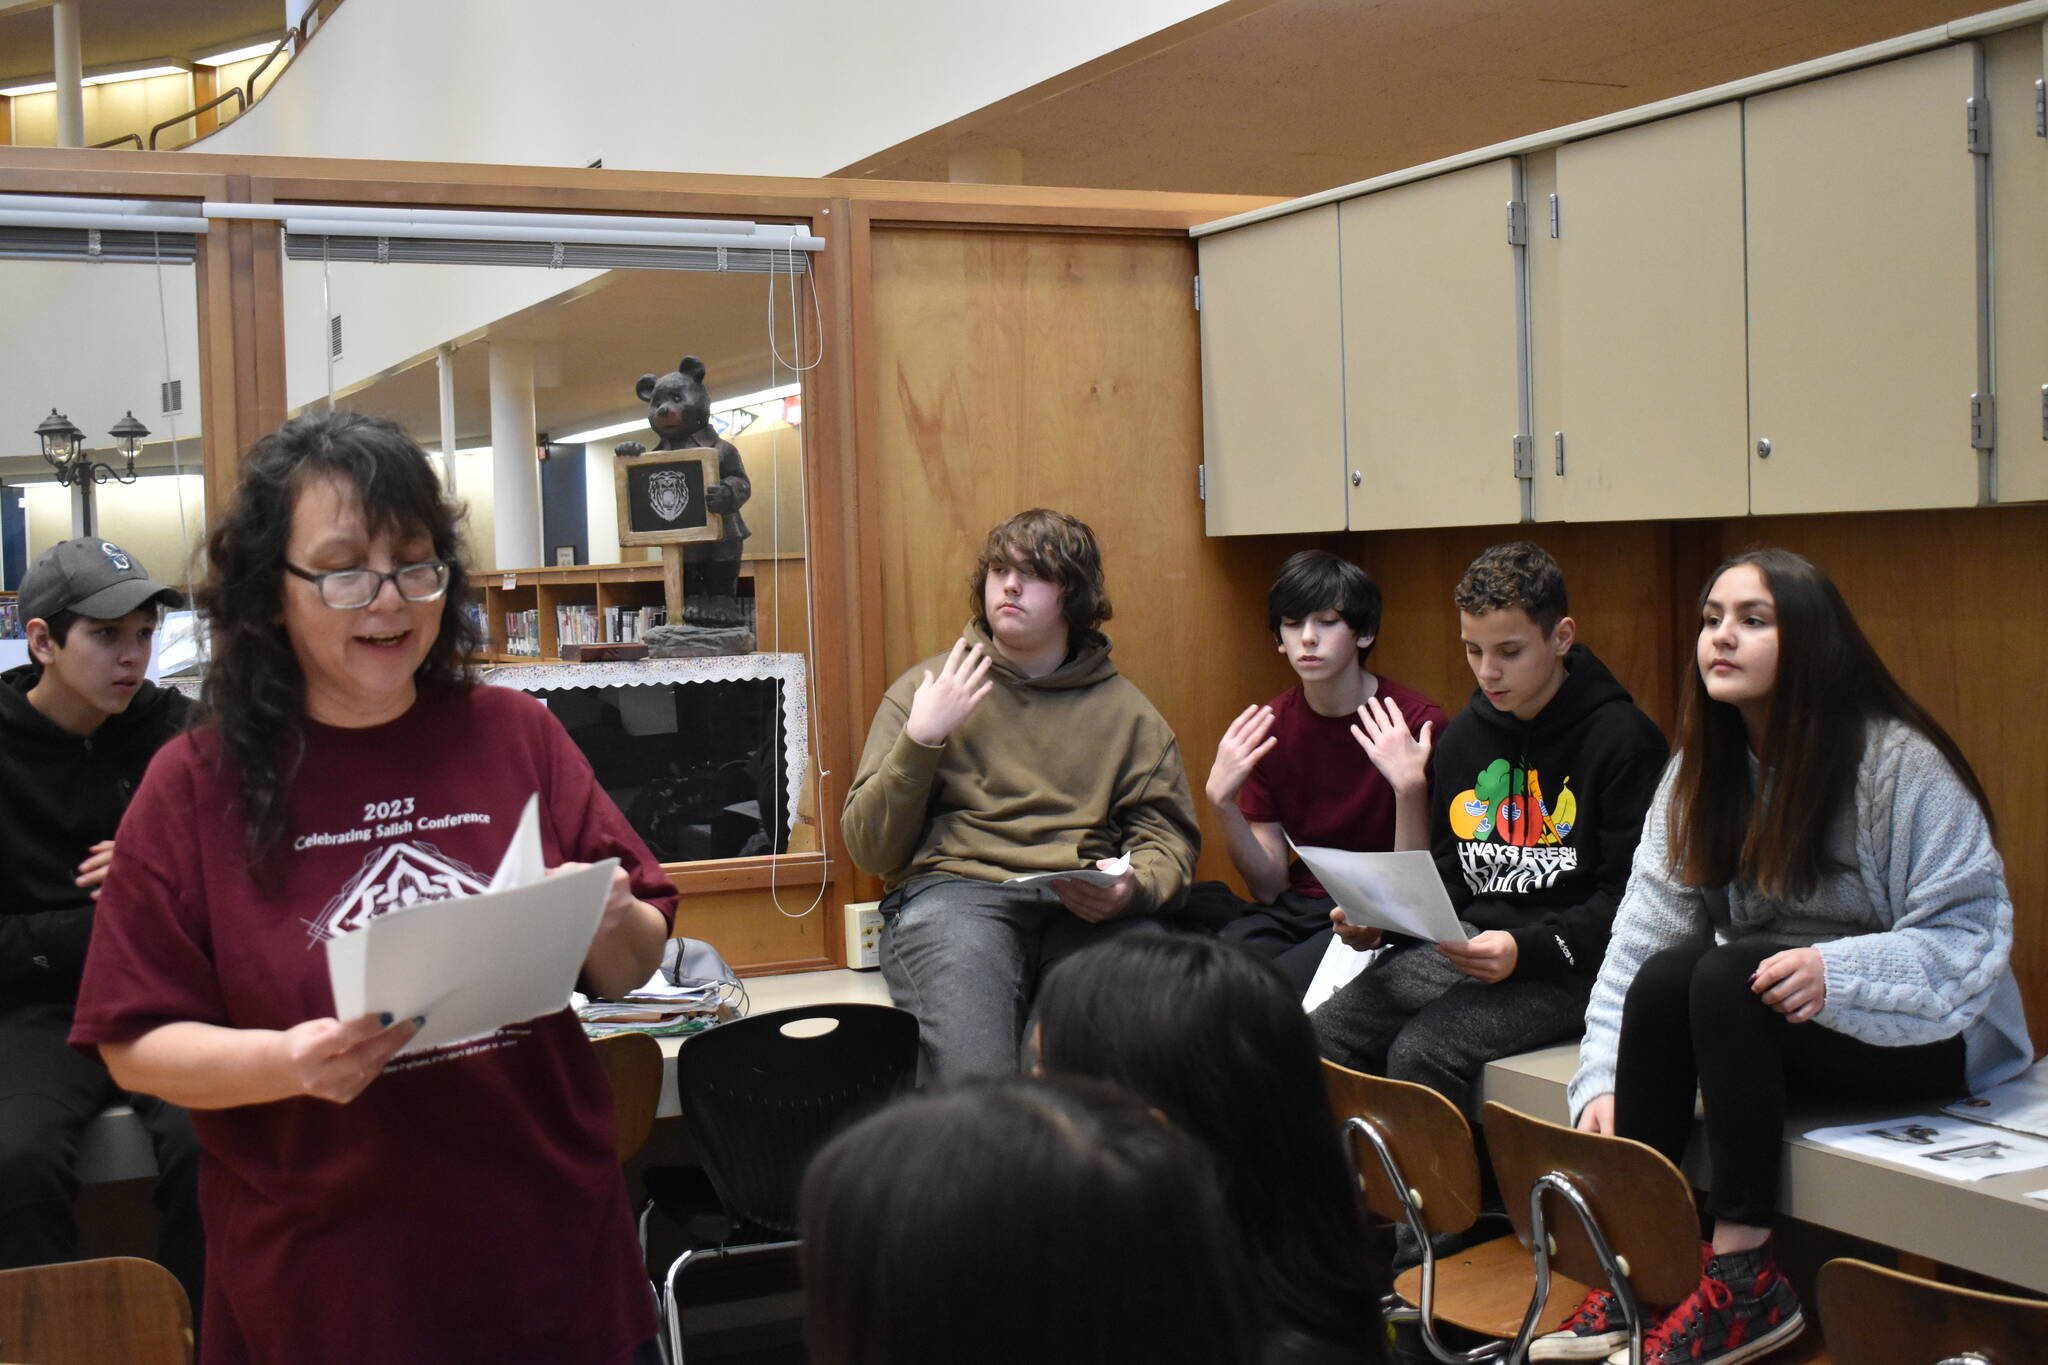 Clayton Franke / The Daily World
Cosette Terry-itewaste, lead teacher and language developer for the Quinault Language Department, leads a lesson on Quinault language at Hoquiam Middle School on Friday, Feb. 2. Pictured are Hoquiam Native Education students, from left: Rodney Chapman, Peyton Steufen, Jasper Butler-Douglass, Ronald J. Landon III, and Tristin Case.